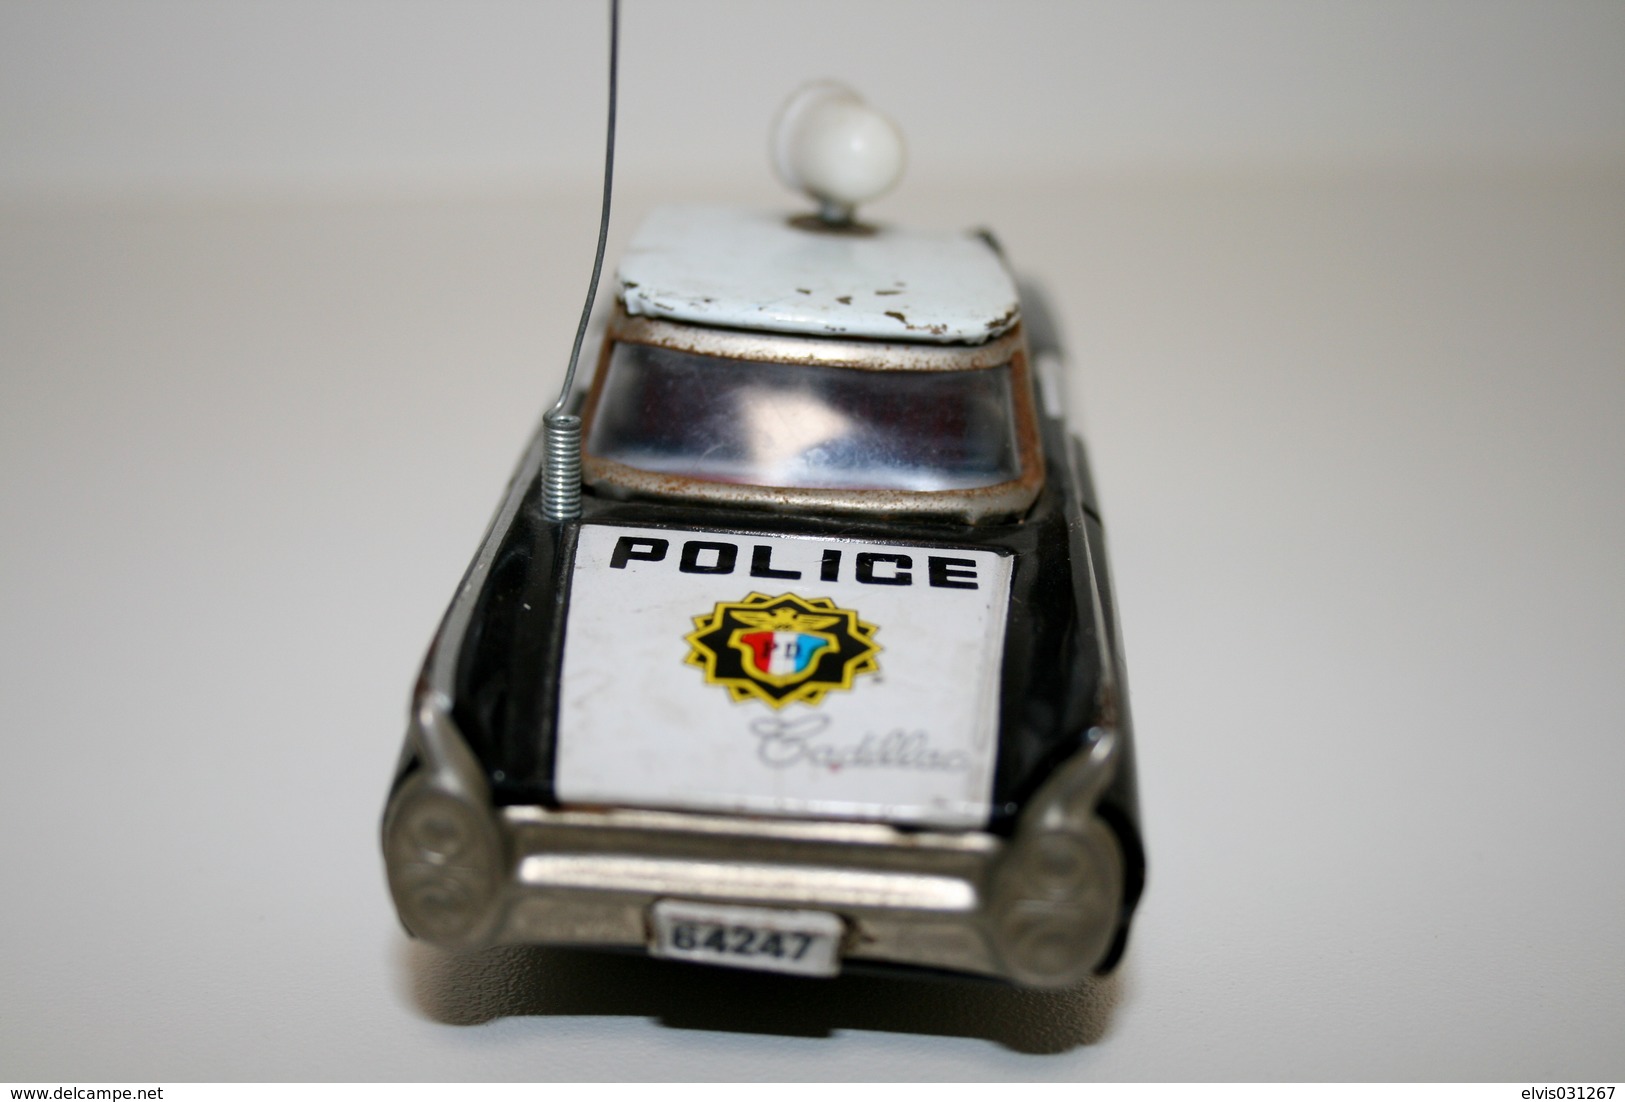 Vintage TIN TOY CAR : Maker ICHICO - Cadillac 4 Door Hardtop Rotating Roof Light POLICE - 15cm - JAPAN - 1960 - Friction - Collectors Et Insolites - Toutes Marques